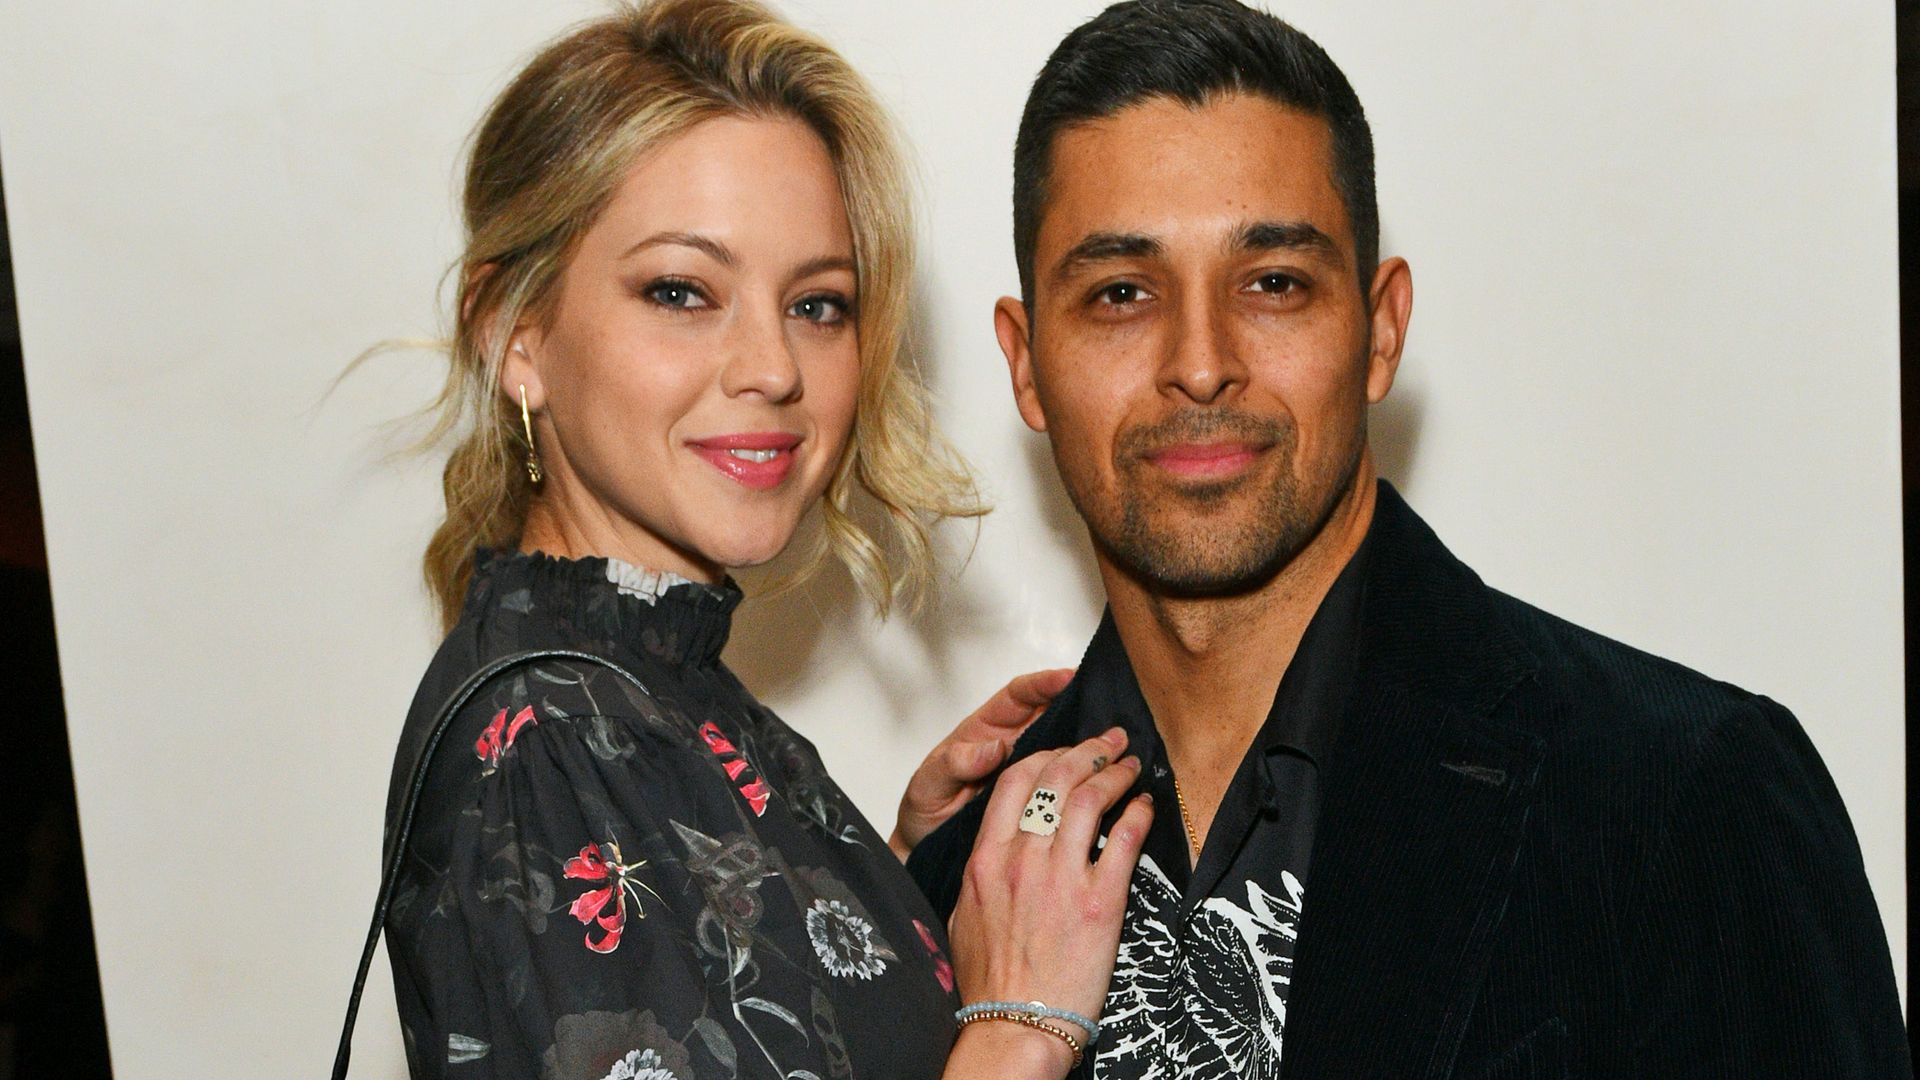 NCIS' Wilmer Valderrama's unconventional living situation revealed